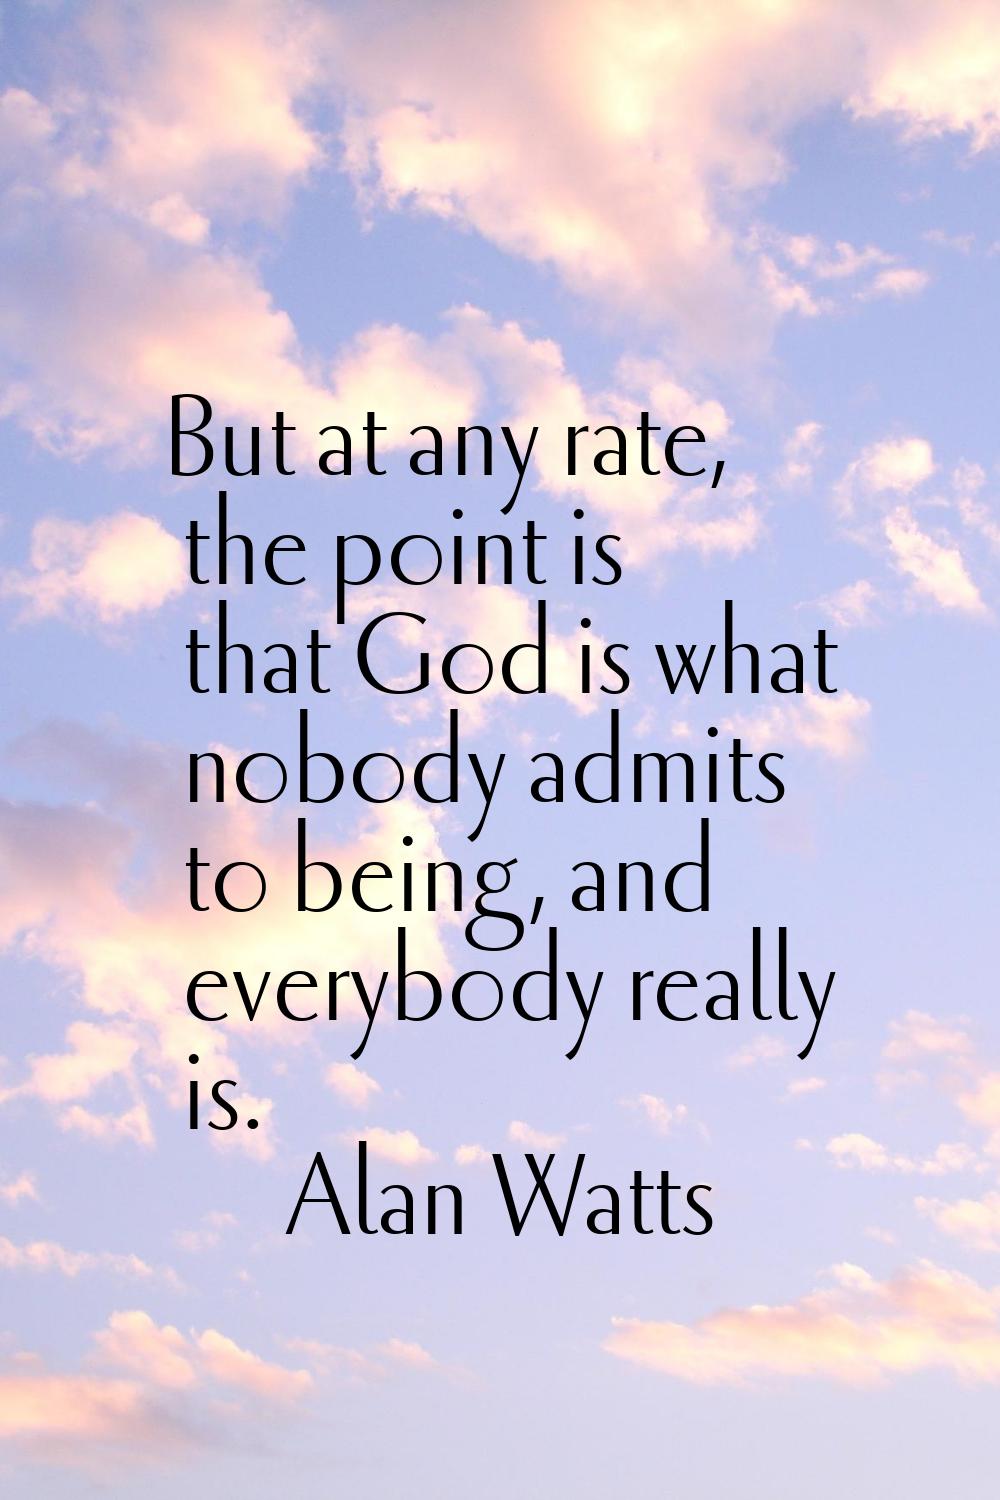 But at any rate, the point is that God is what nobody admits to being, and everybody really is.